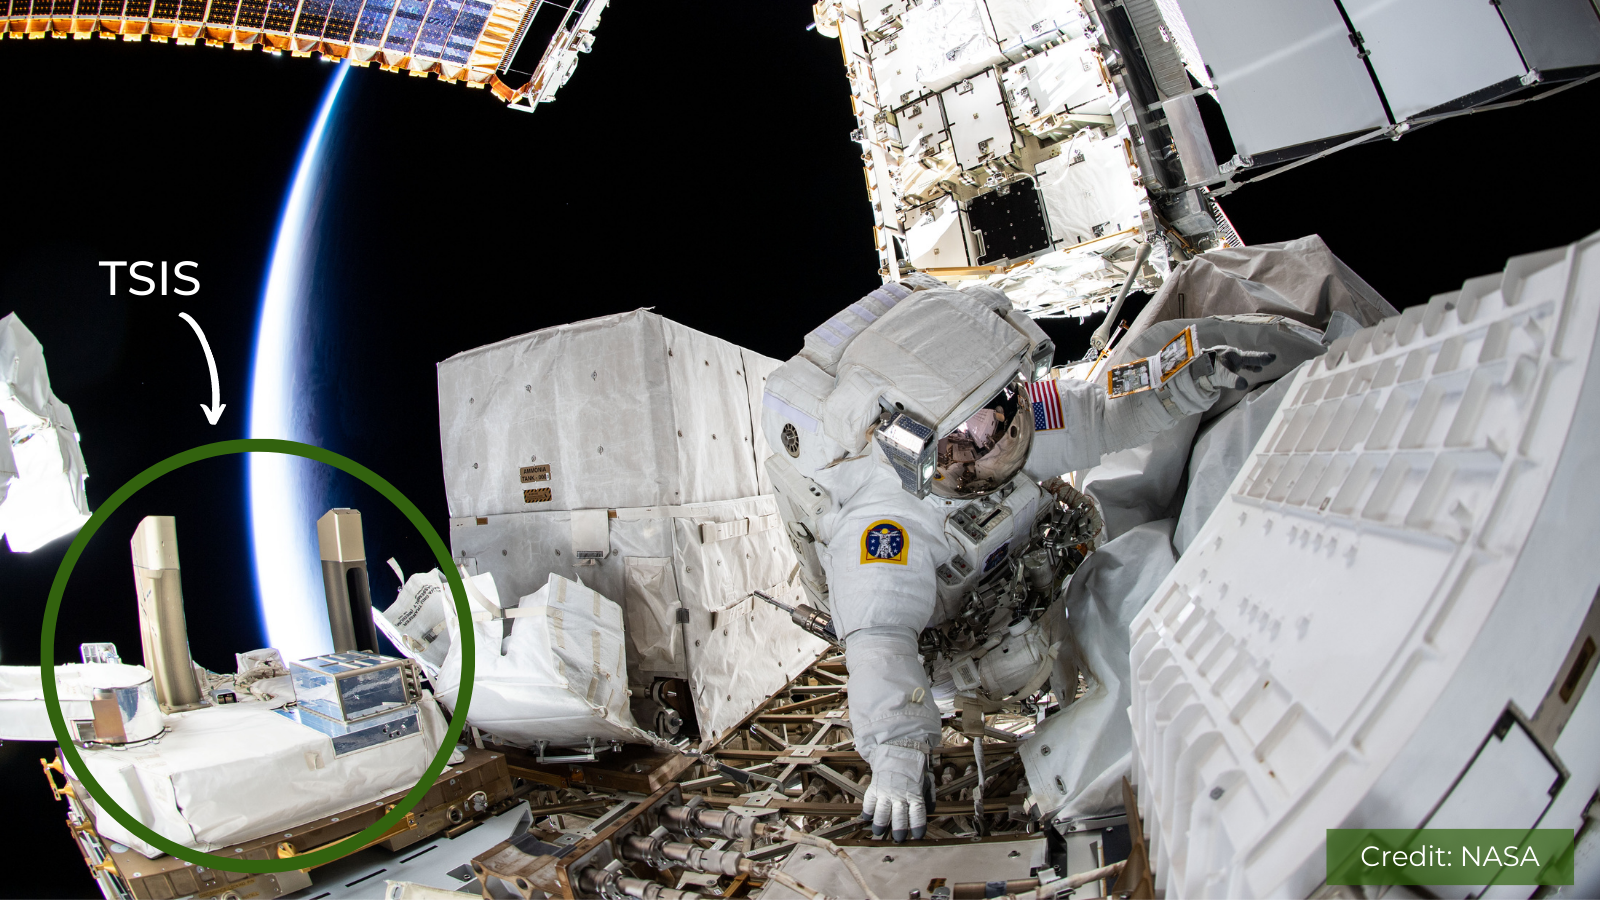 A spacewalking astronaut next to the TSIS instrument mounted on the International Space Station.